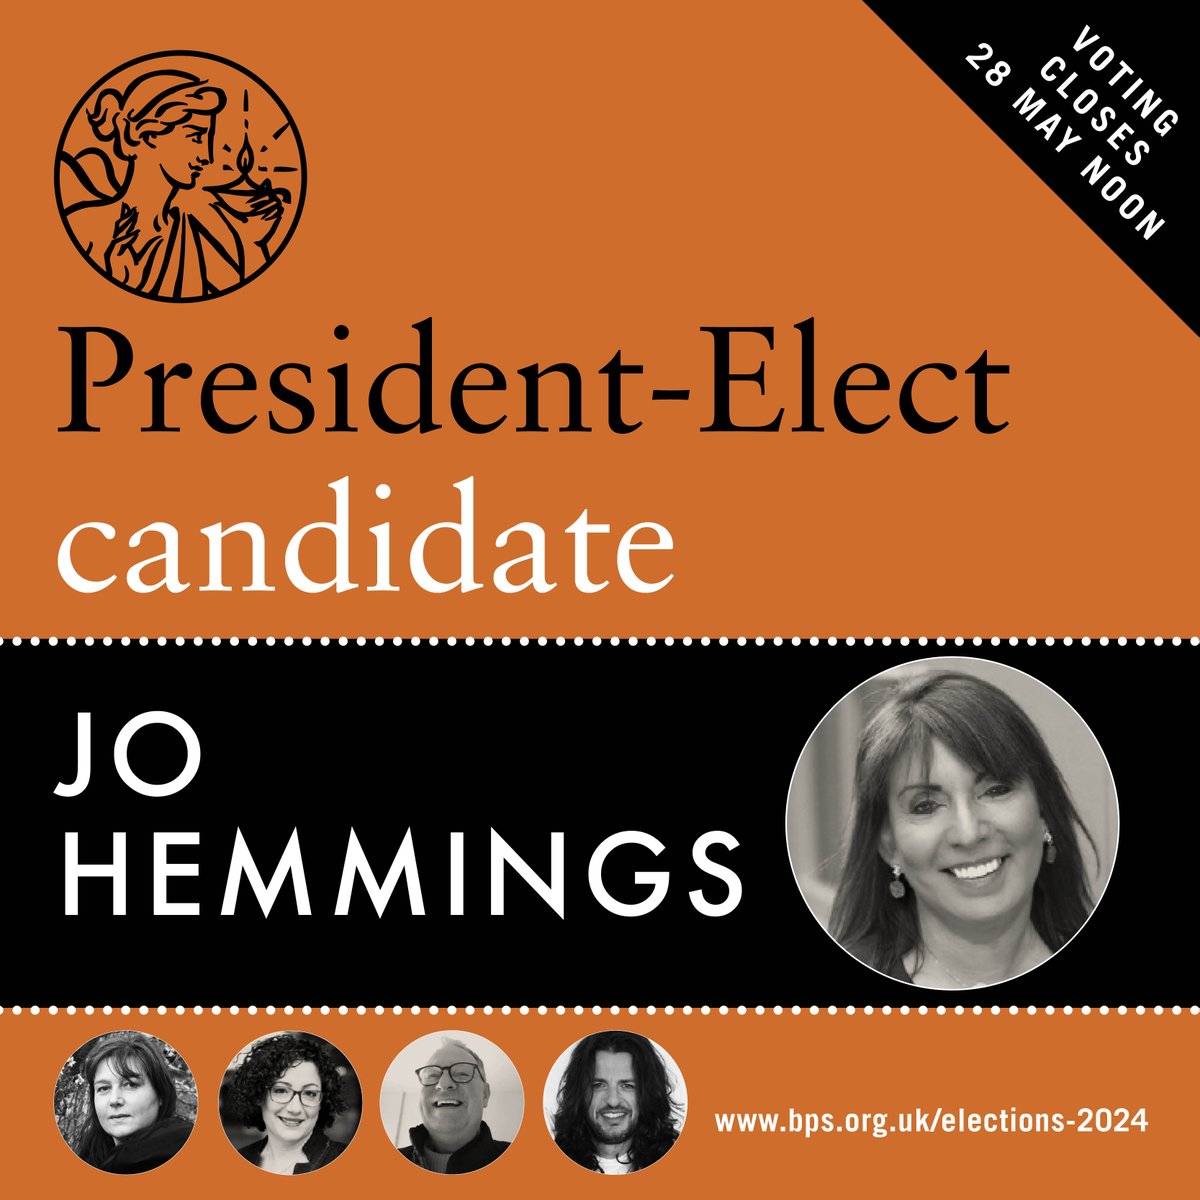 Meet President-Elect candidate, Jo Hemmings, one of five candidates standing for the role of President-Elect this year. Members can now vote for their preferred candidate for the roles of both President-Elect and Elected-Trustee. Meet Jo: bps.org.uk/meet-candidate…